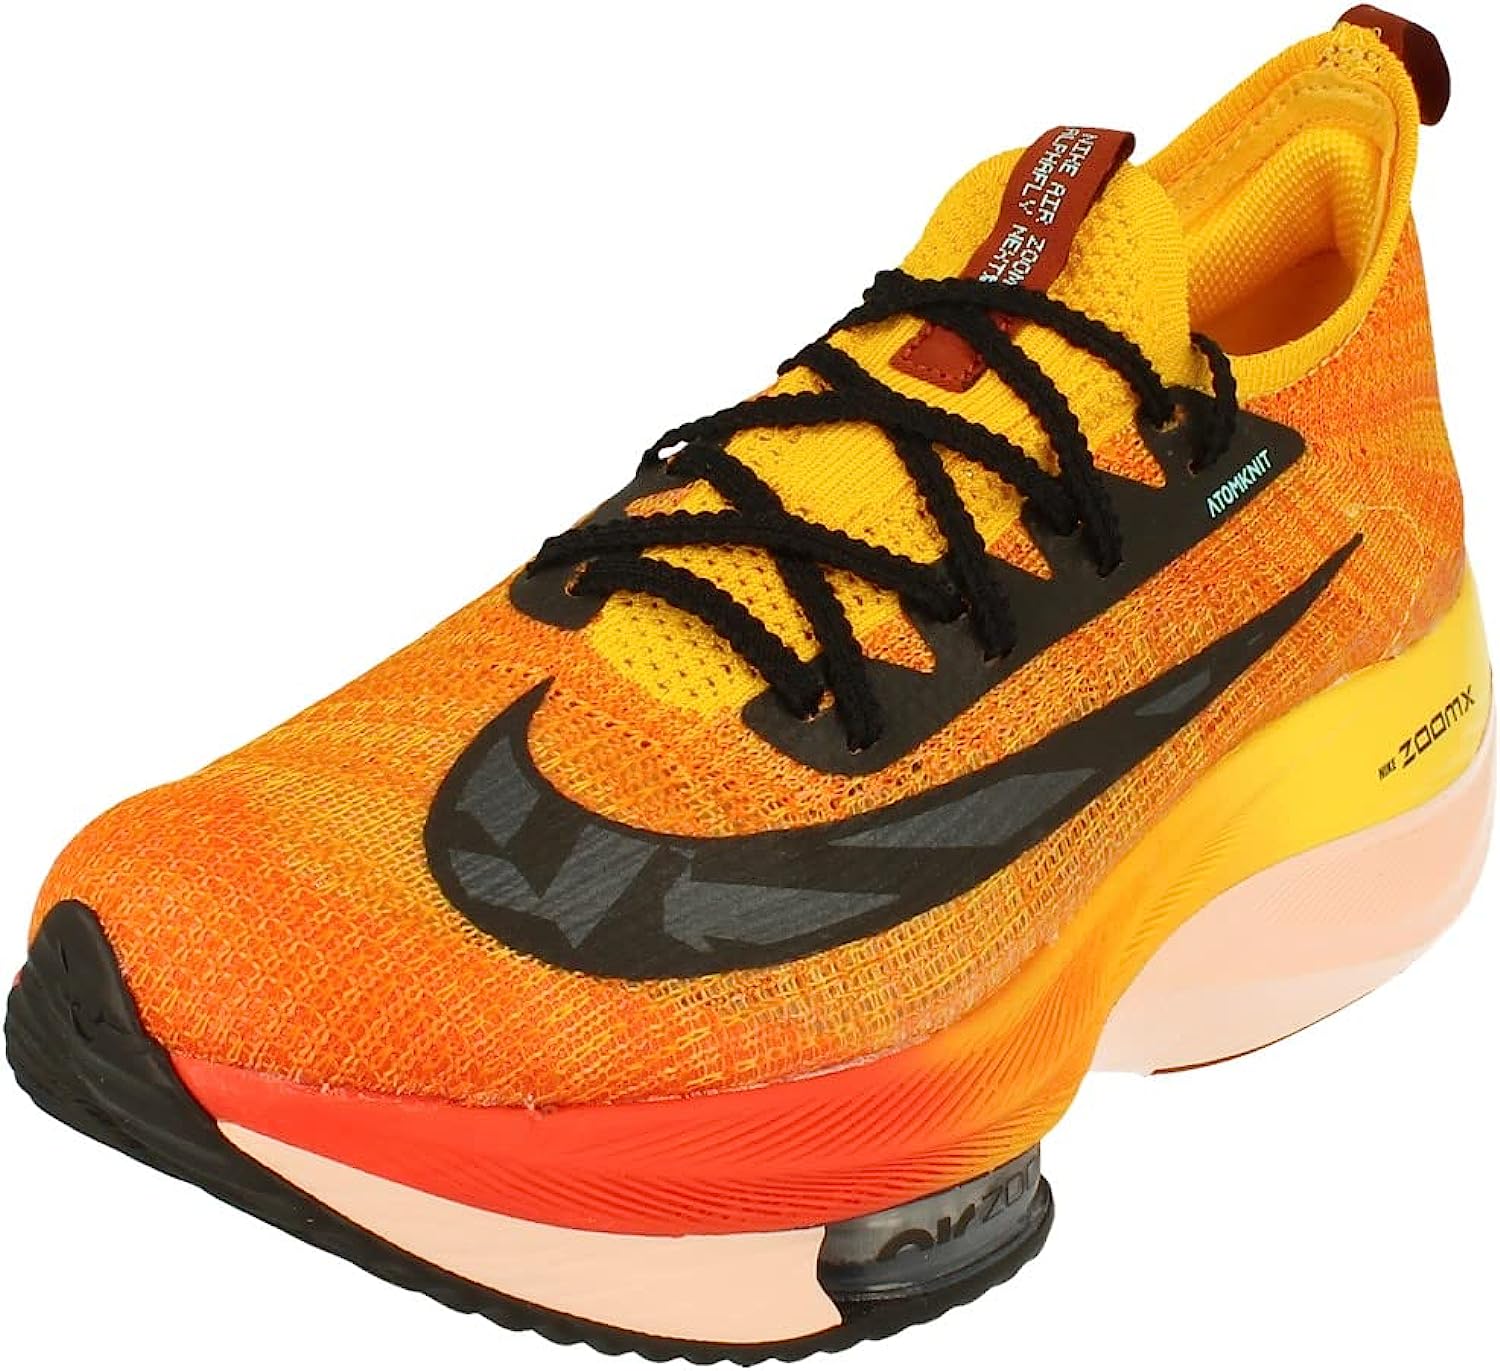 Nike Air Zoom Alphafly Next% Fk Mens Running Trainers [...]